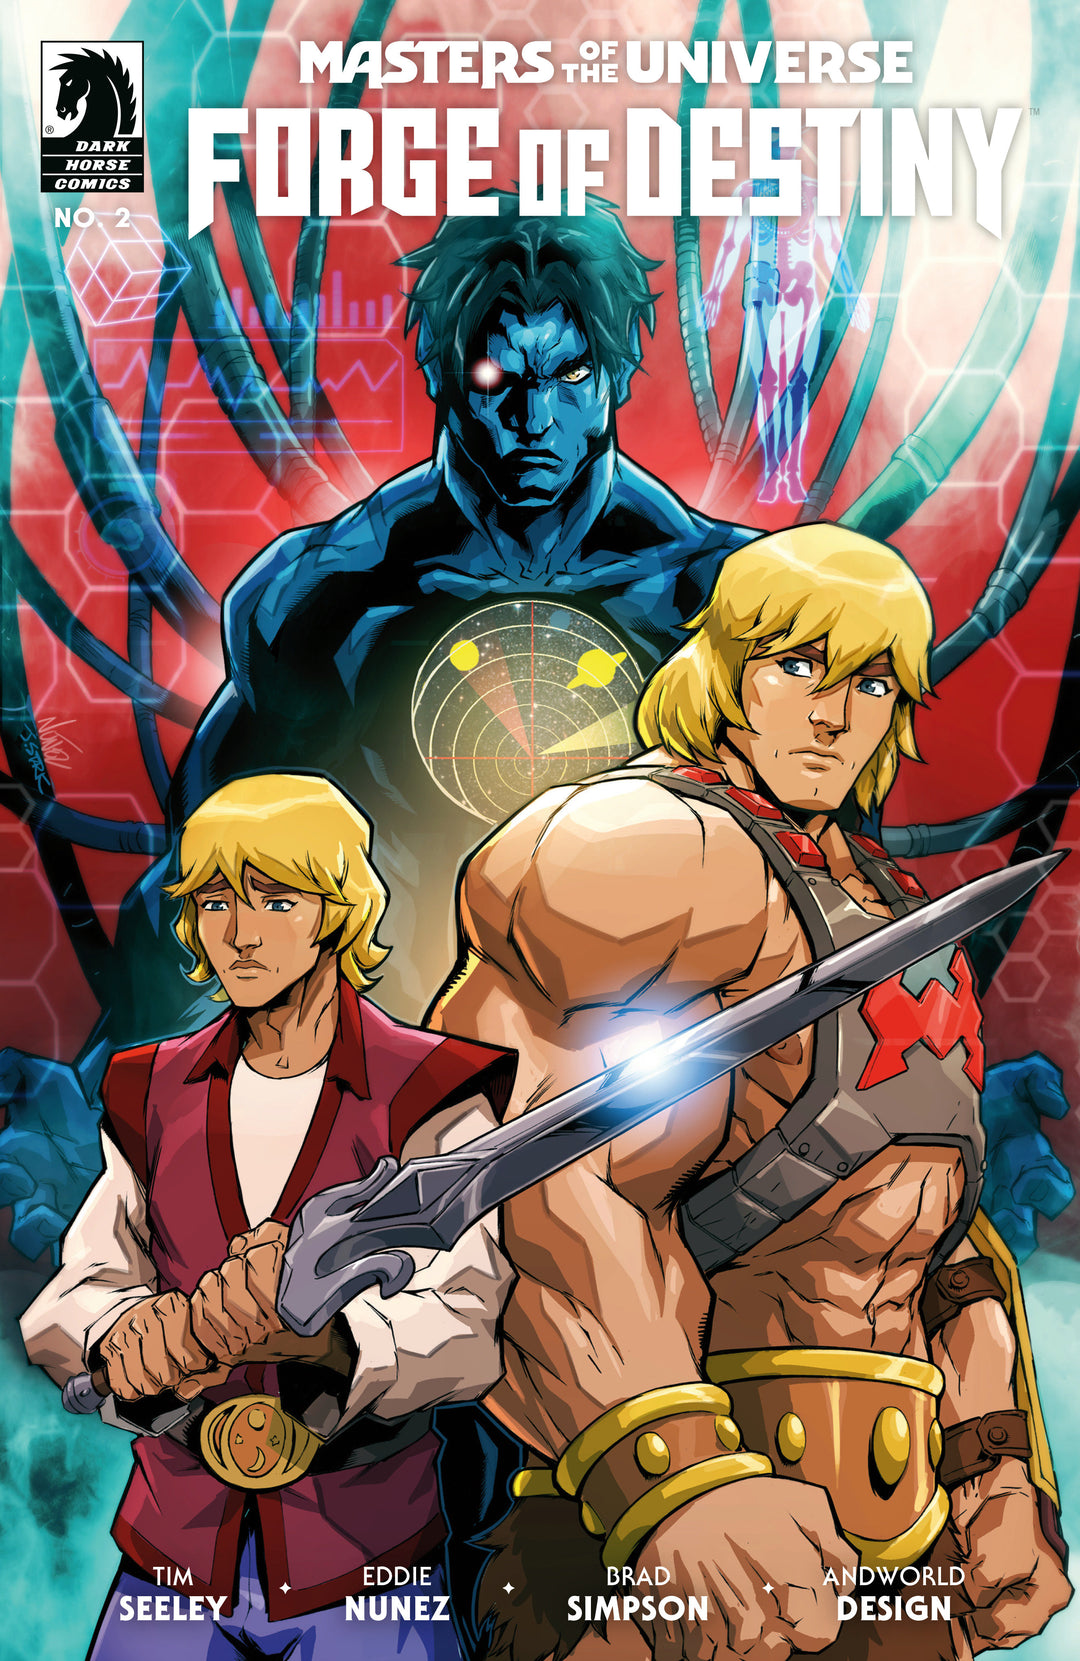 Masters Of The Universe Forge Of Destiny #2 (Cover A) (Eddie Nunez)